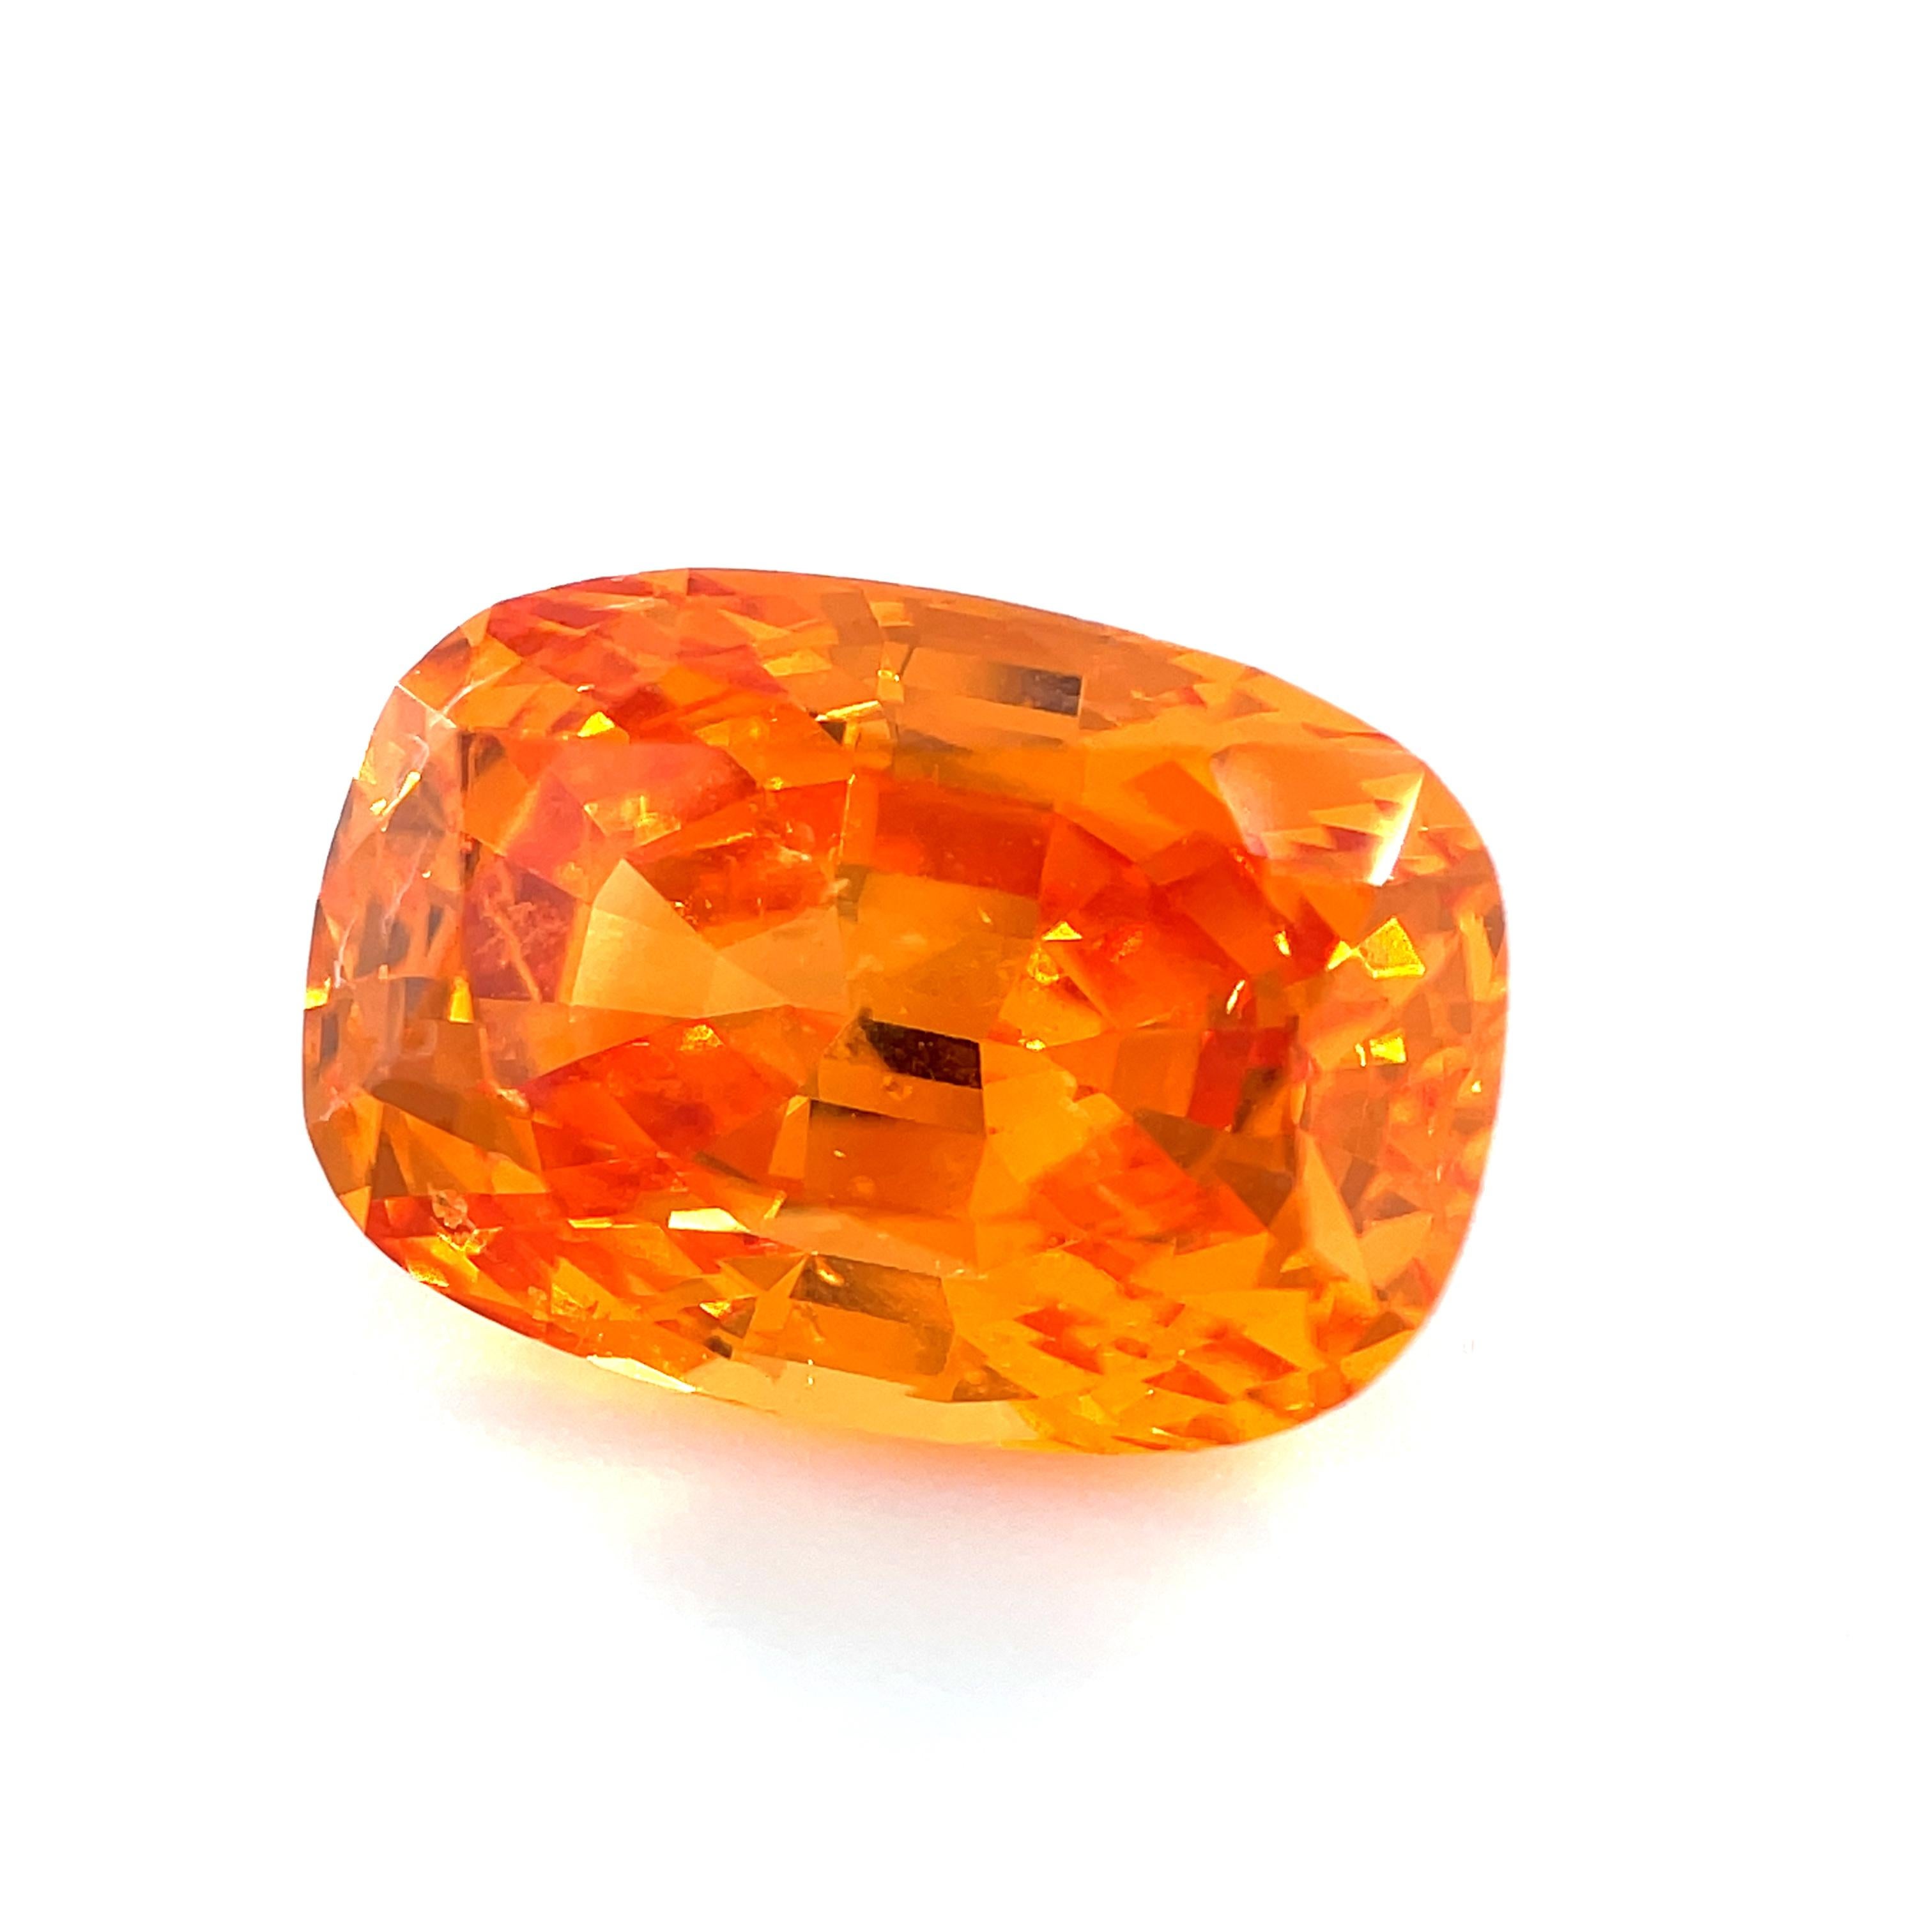 Loose Spessartite Mandarin Garnet, 4.97 Carats, Gemstone for Ring or Pendant In New Condition For Sale In Los Angeles, CA